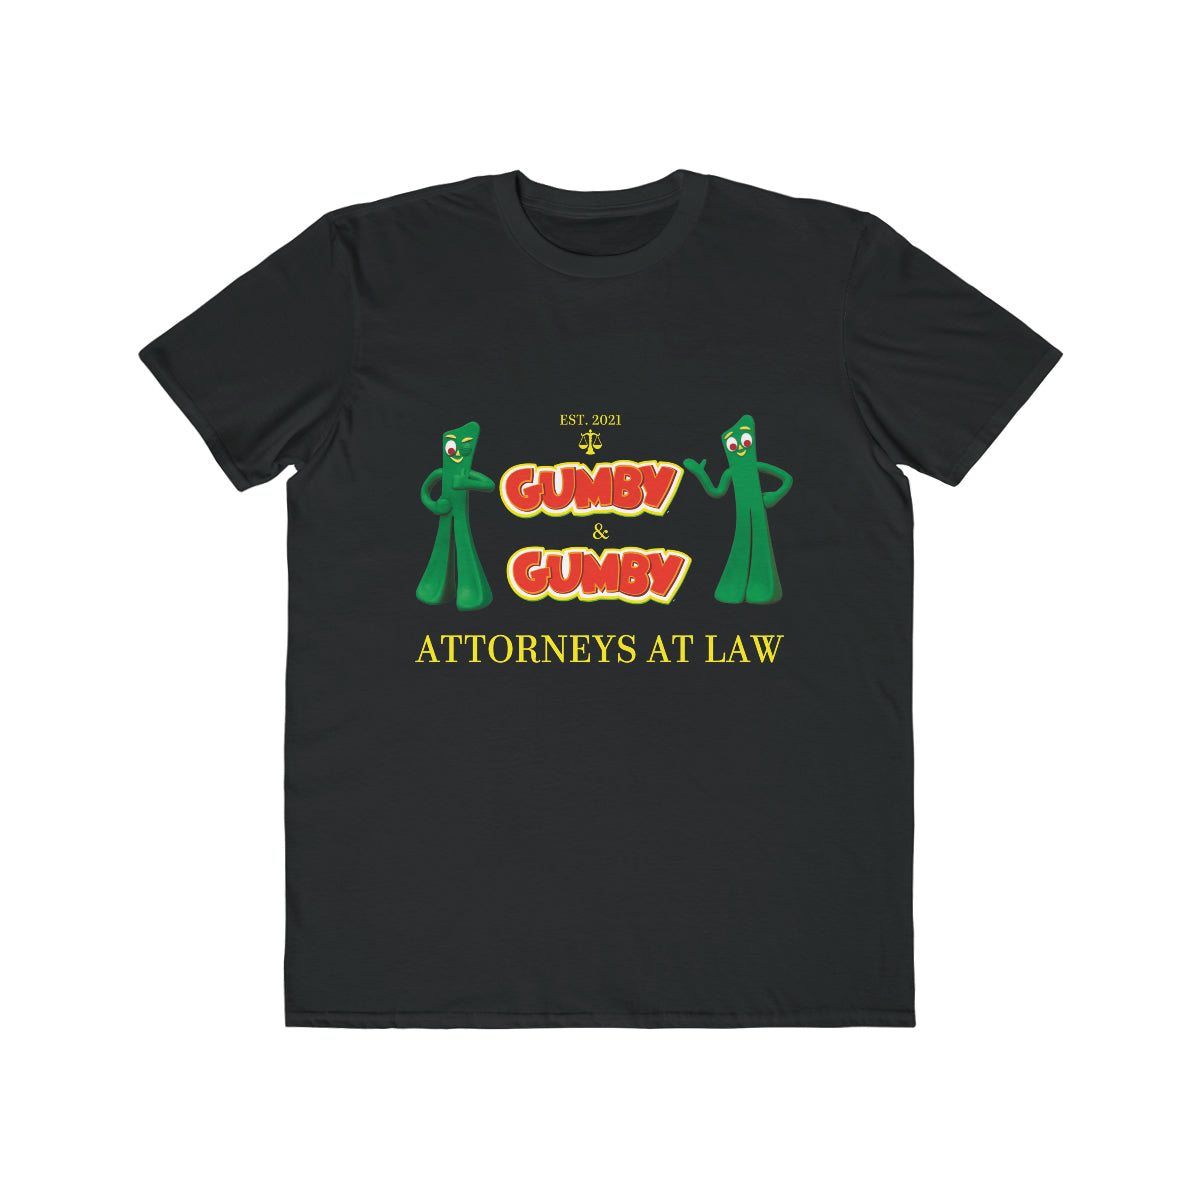 Gumby & Gumby Attorneys at Law